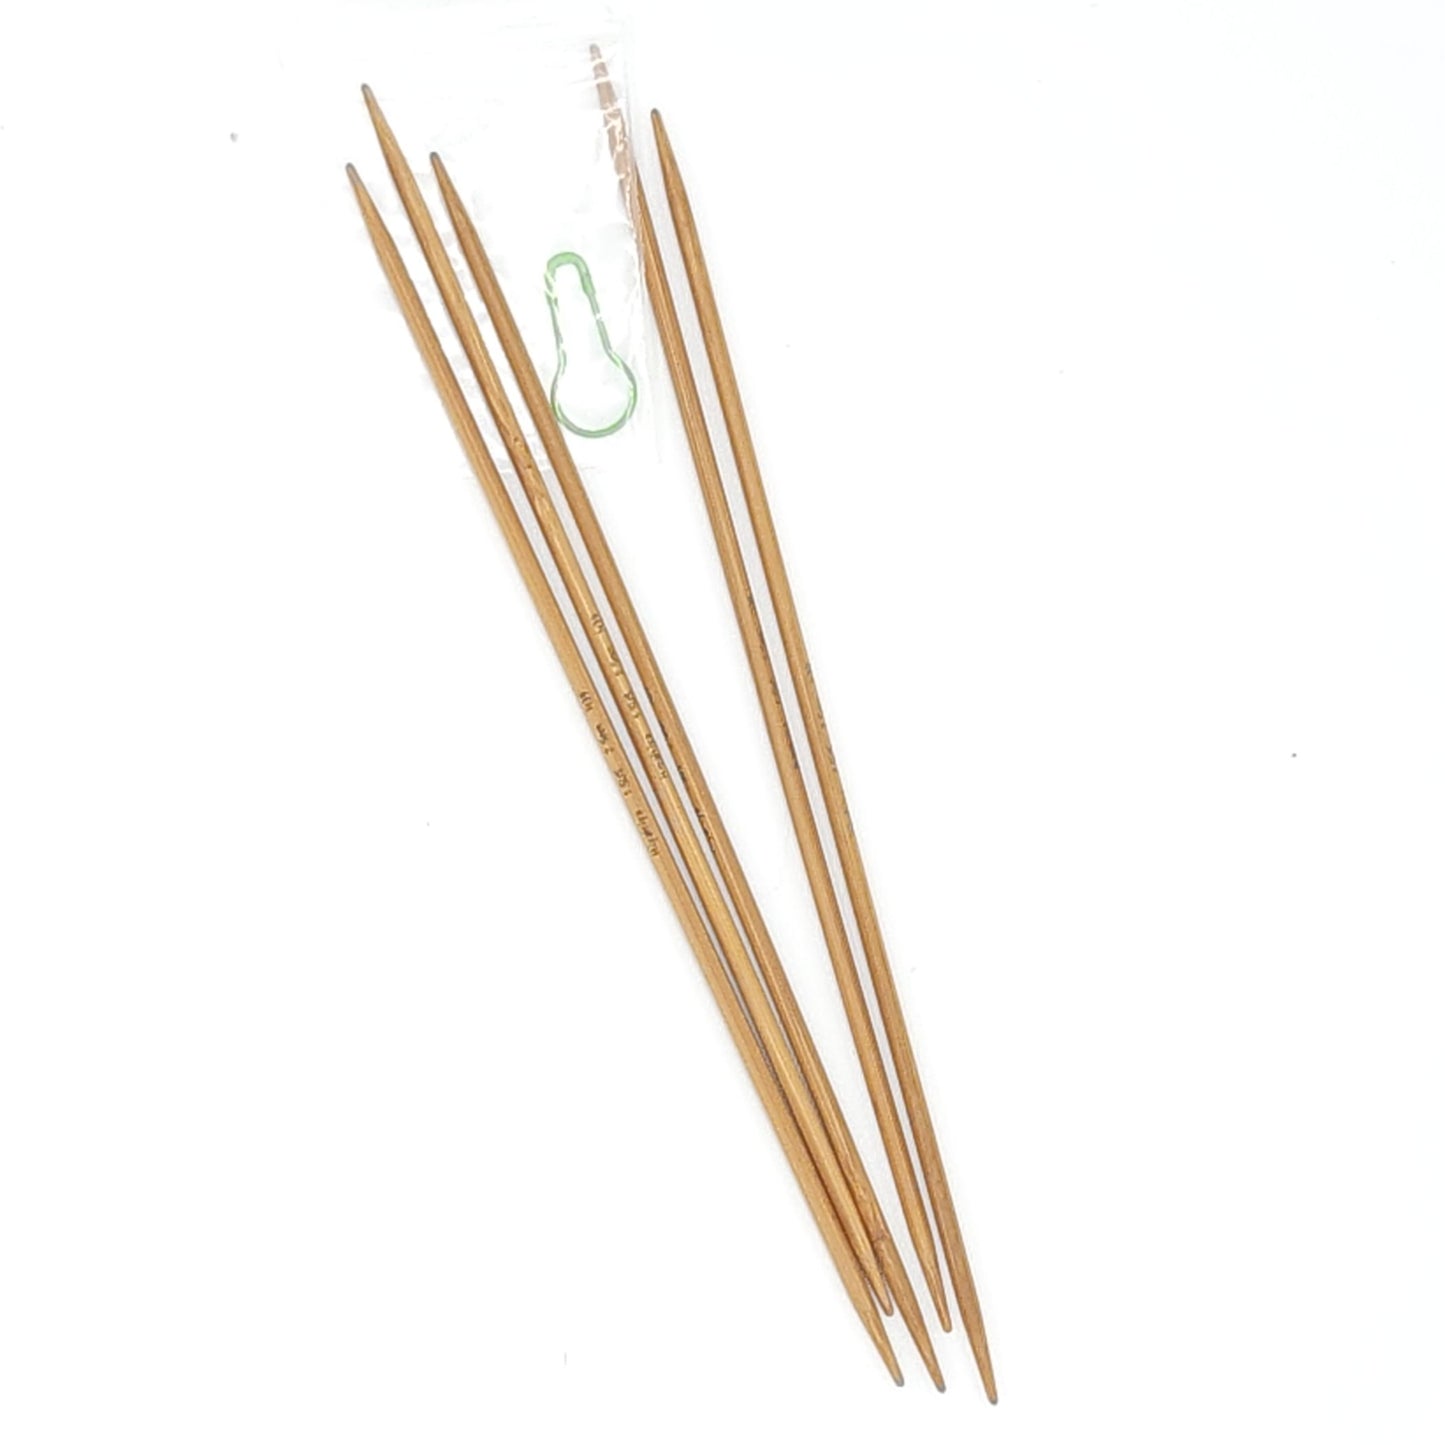 Bamboo Double Pointed Needes - 2.5mm x 15cm - set of 5